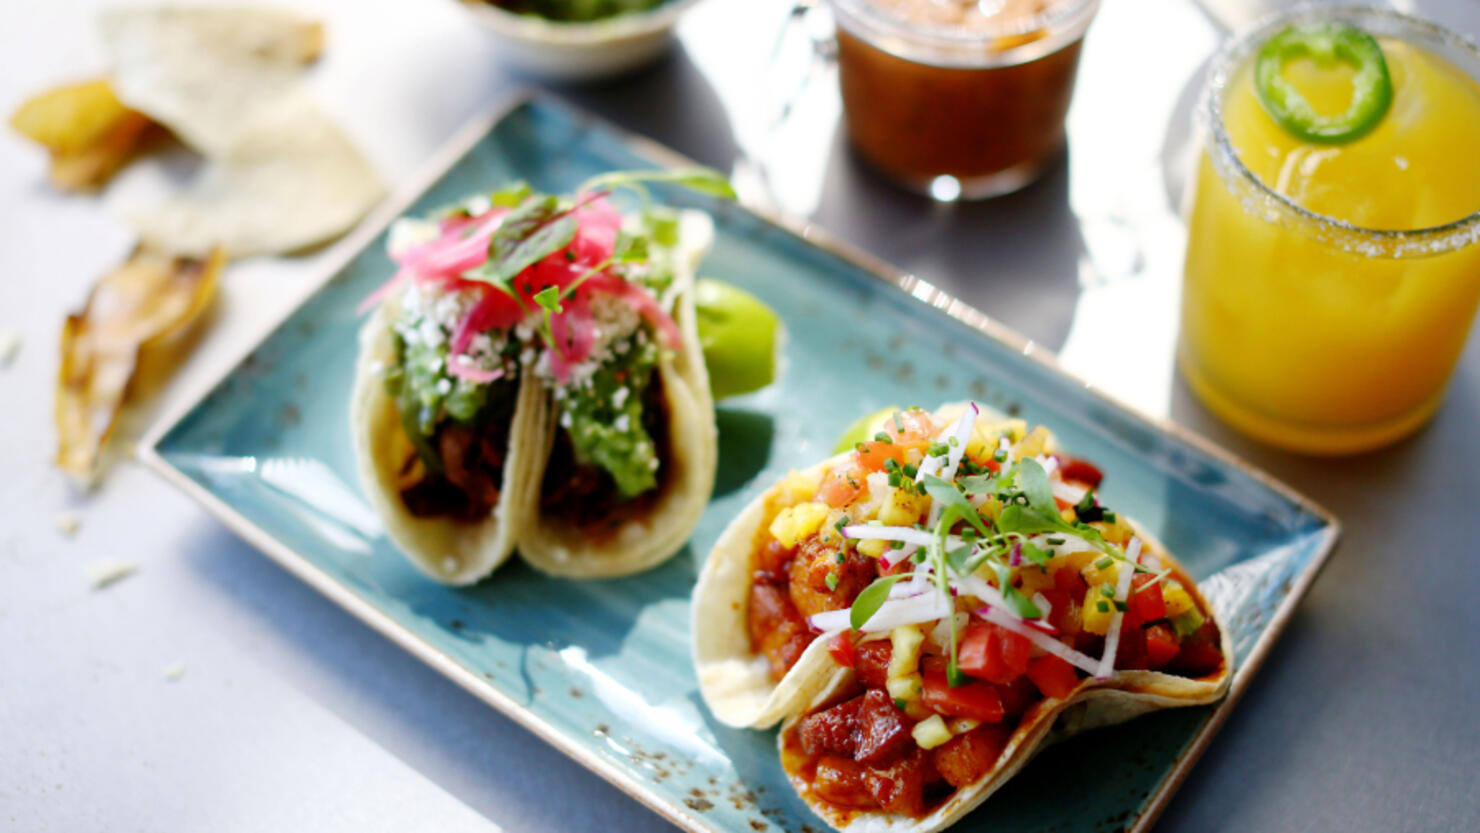 Taco And Margarita Festival Coming To Nashville | iHeart